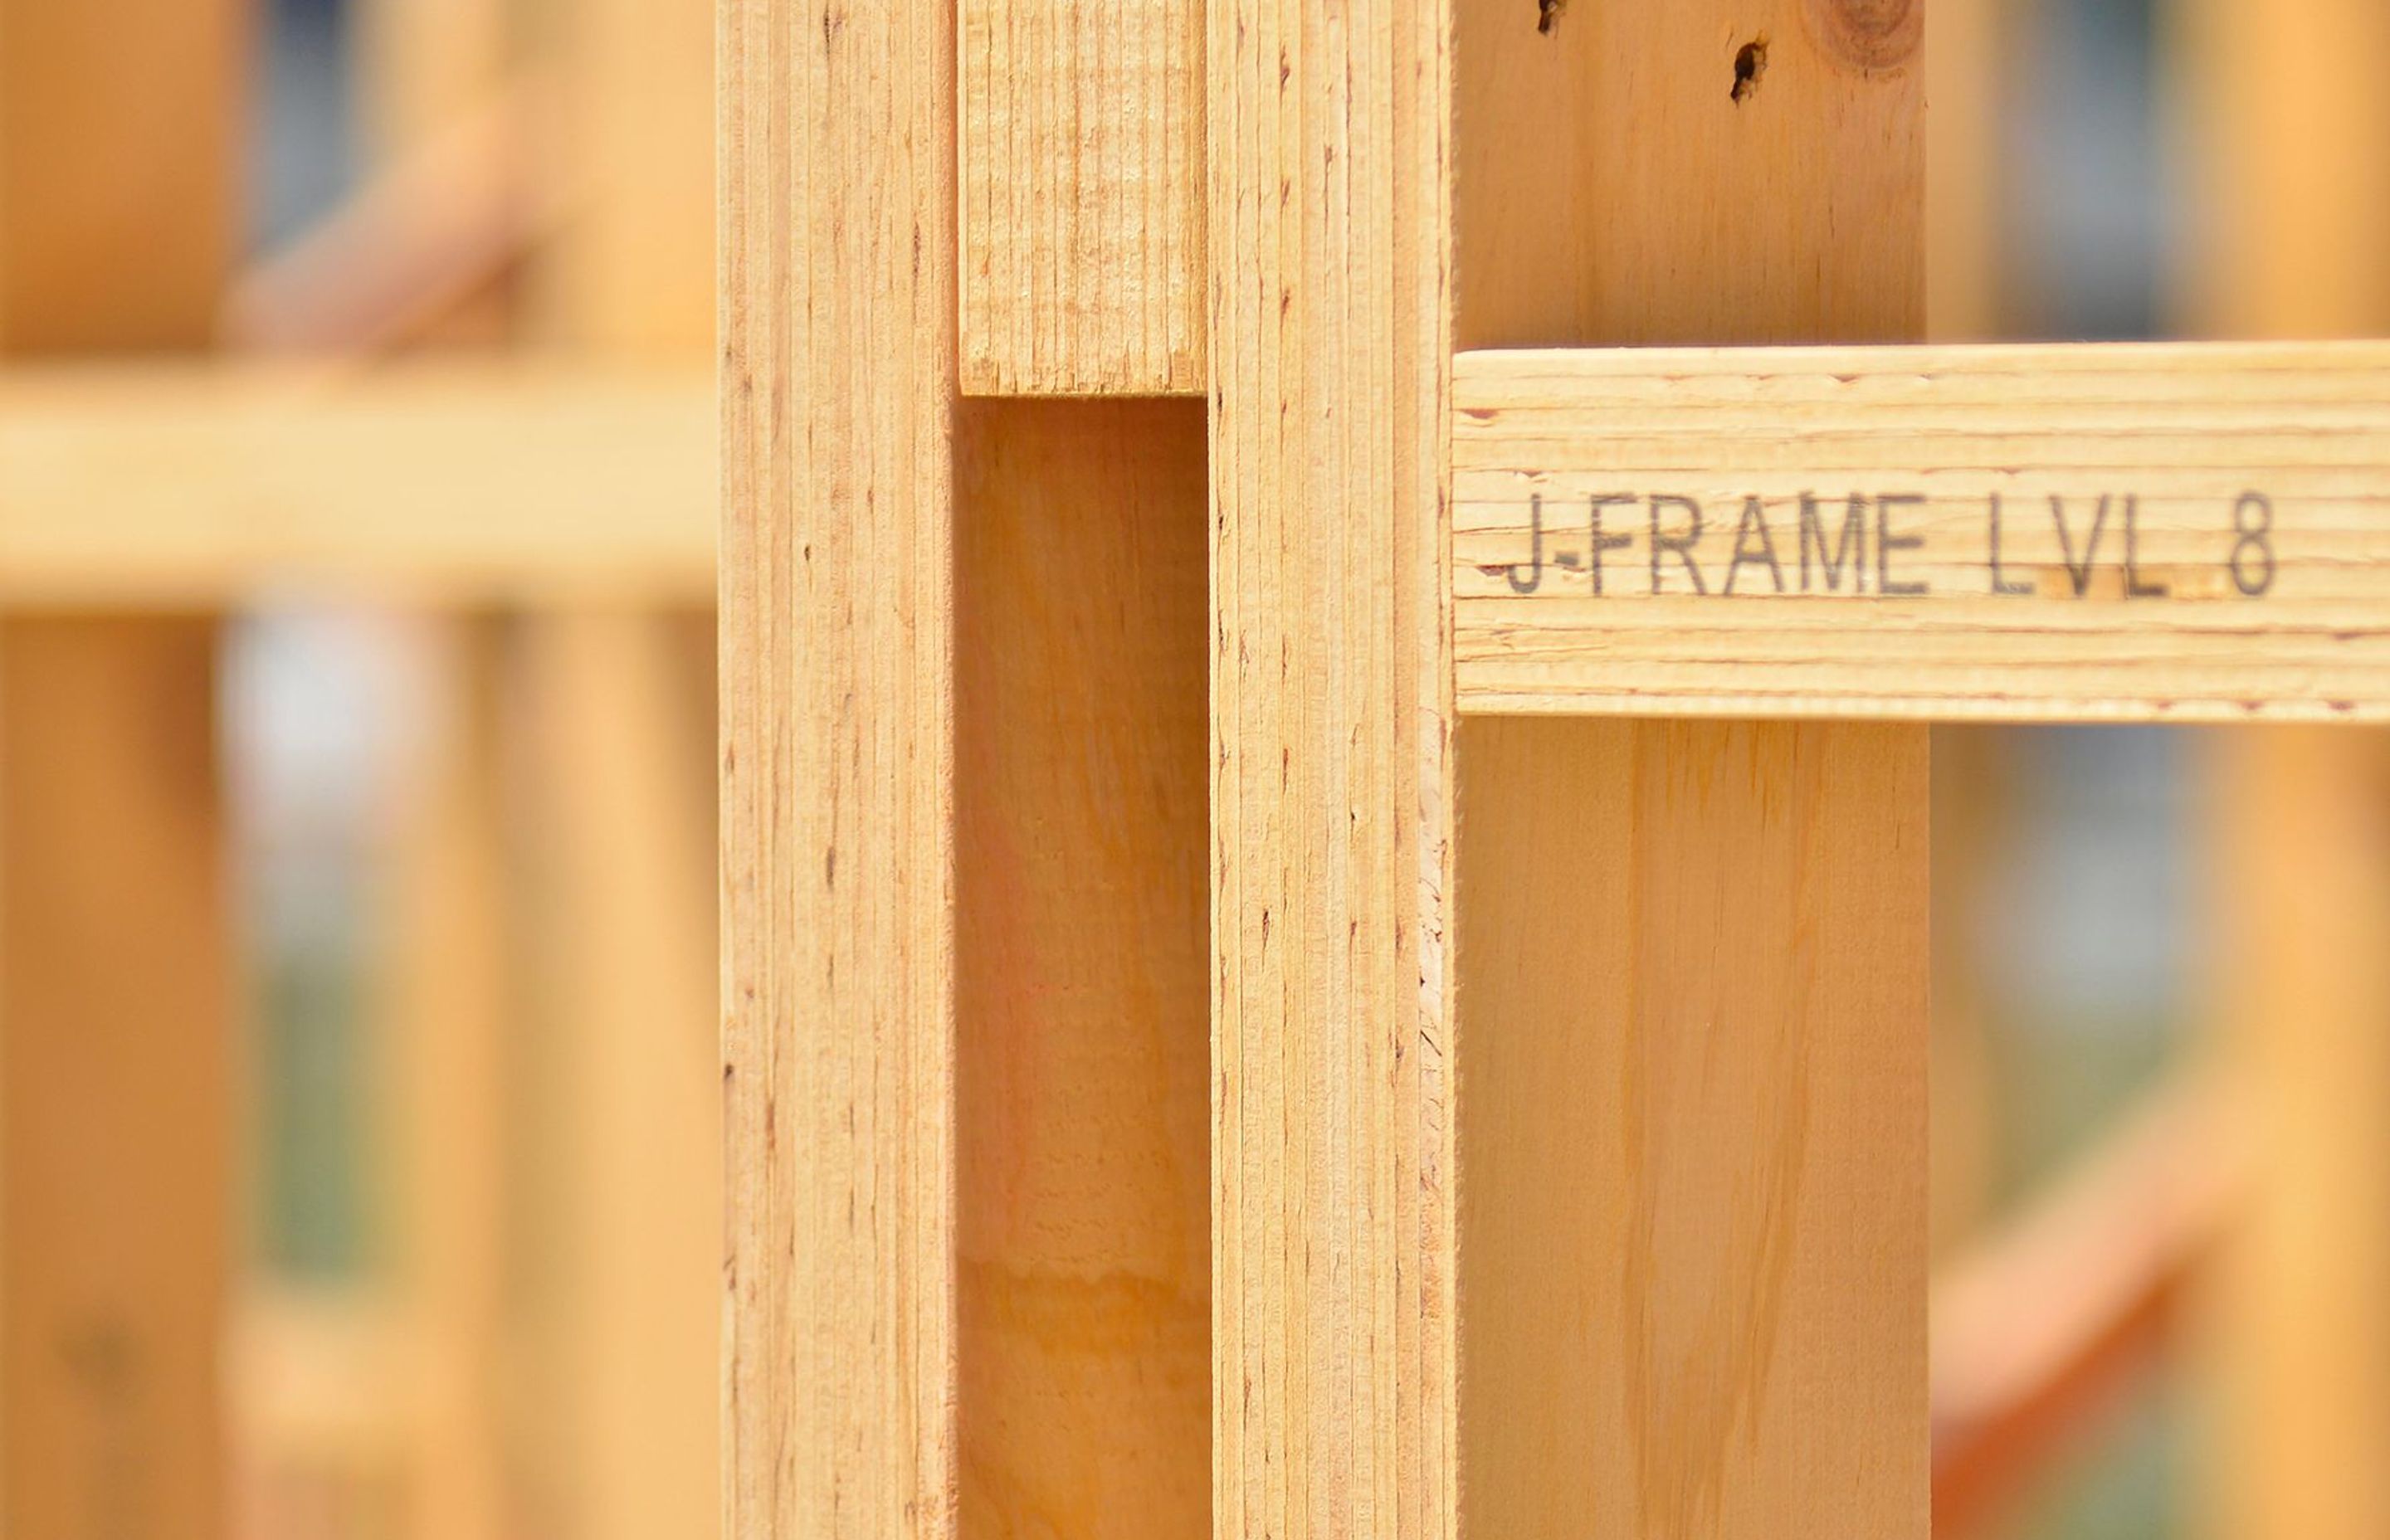 J-Frame: Premium Framing with Outstanding Results